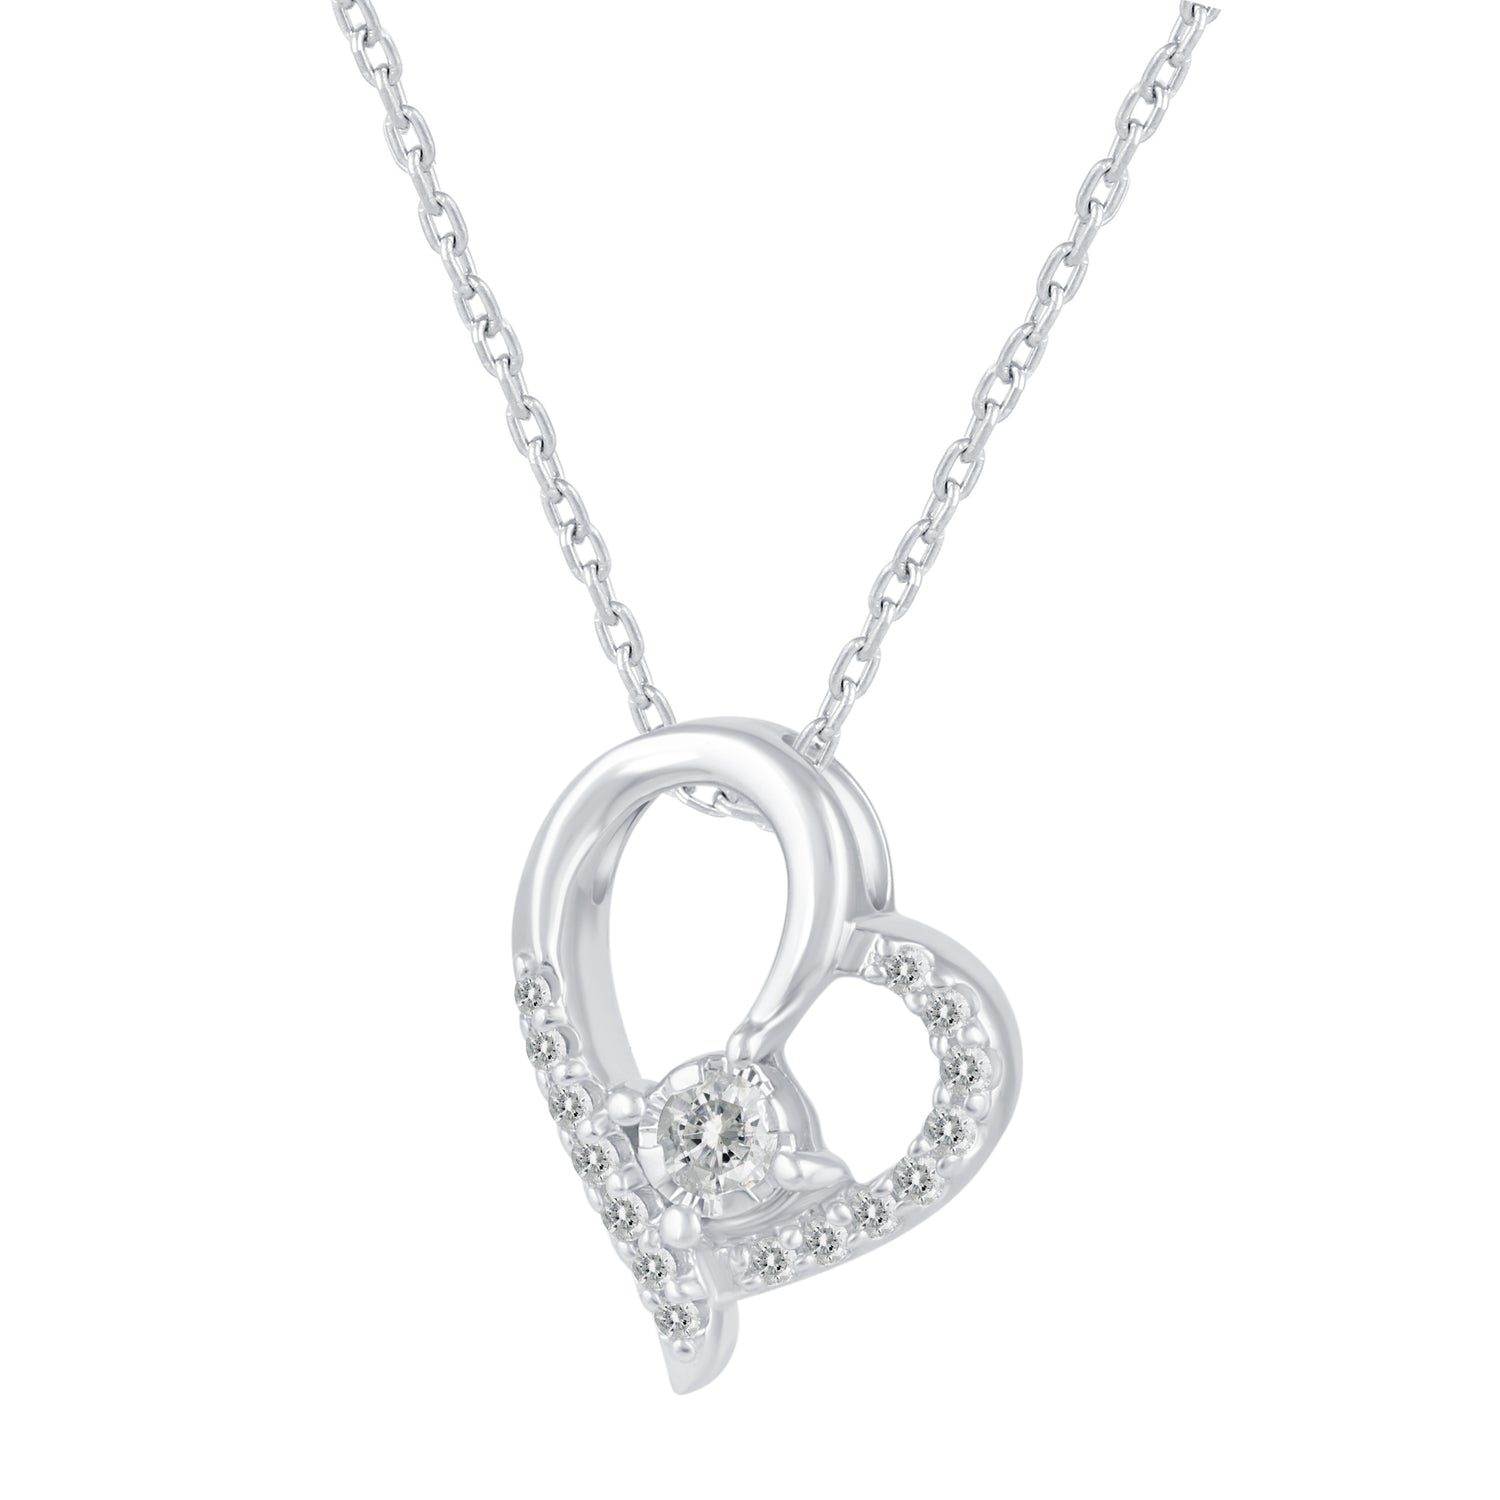 1/6 Cttw Natural Diamond Open Heart Floating Stone Pendant Necklace set in 925 Sterling Silver